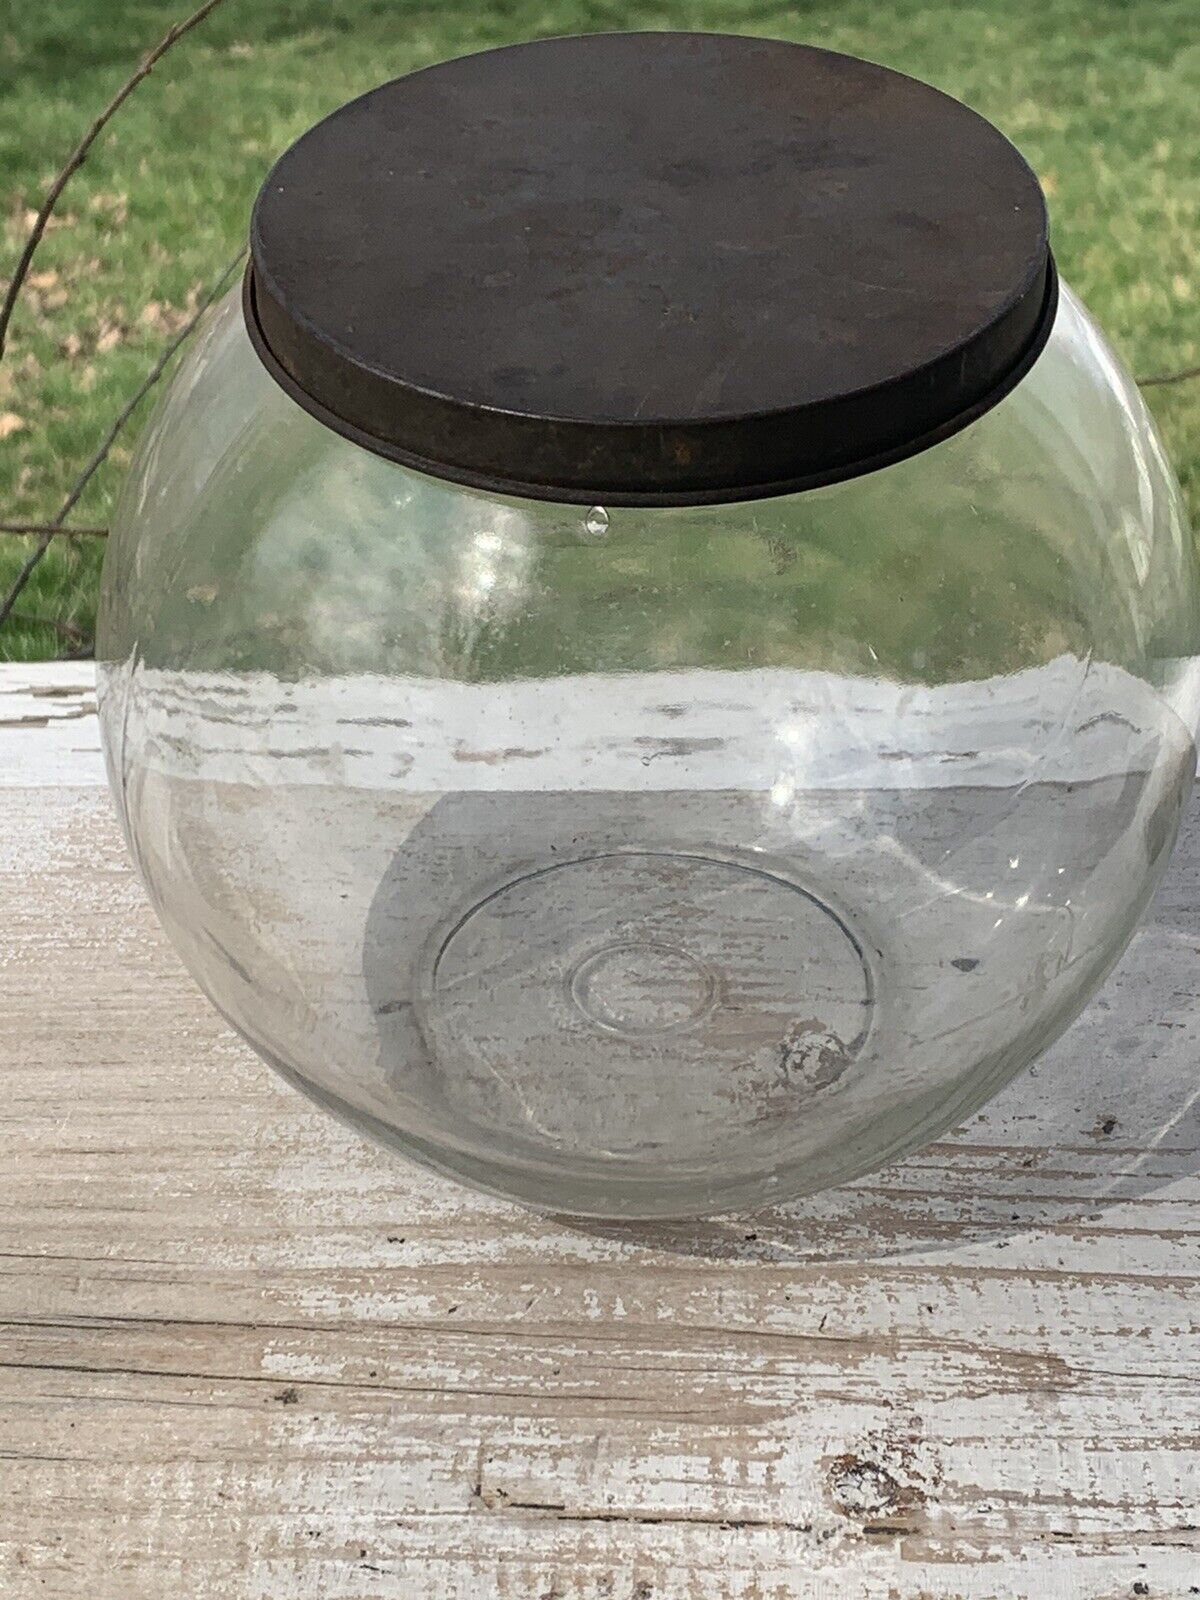 ANTIQUE HAND BLOWN GLASS FISH BOWL GENERAL STORE CANDY JAR WITH TIN LID (16A)